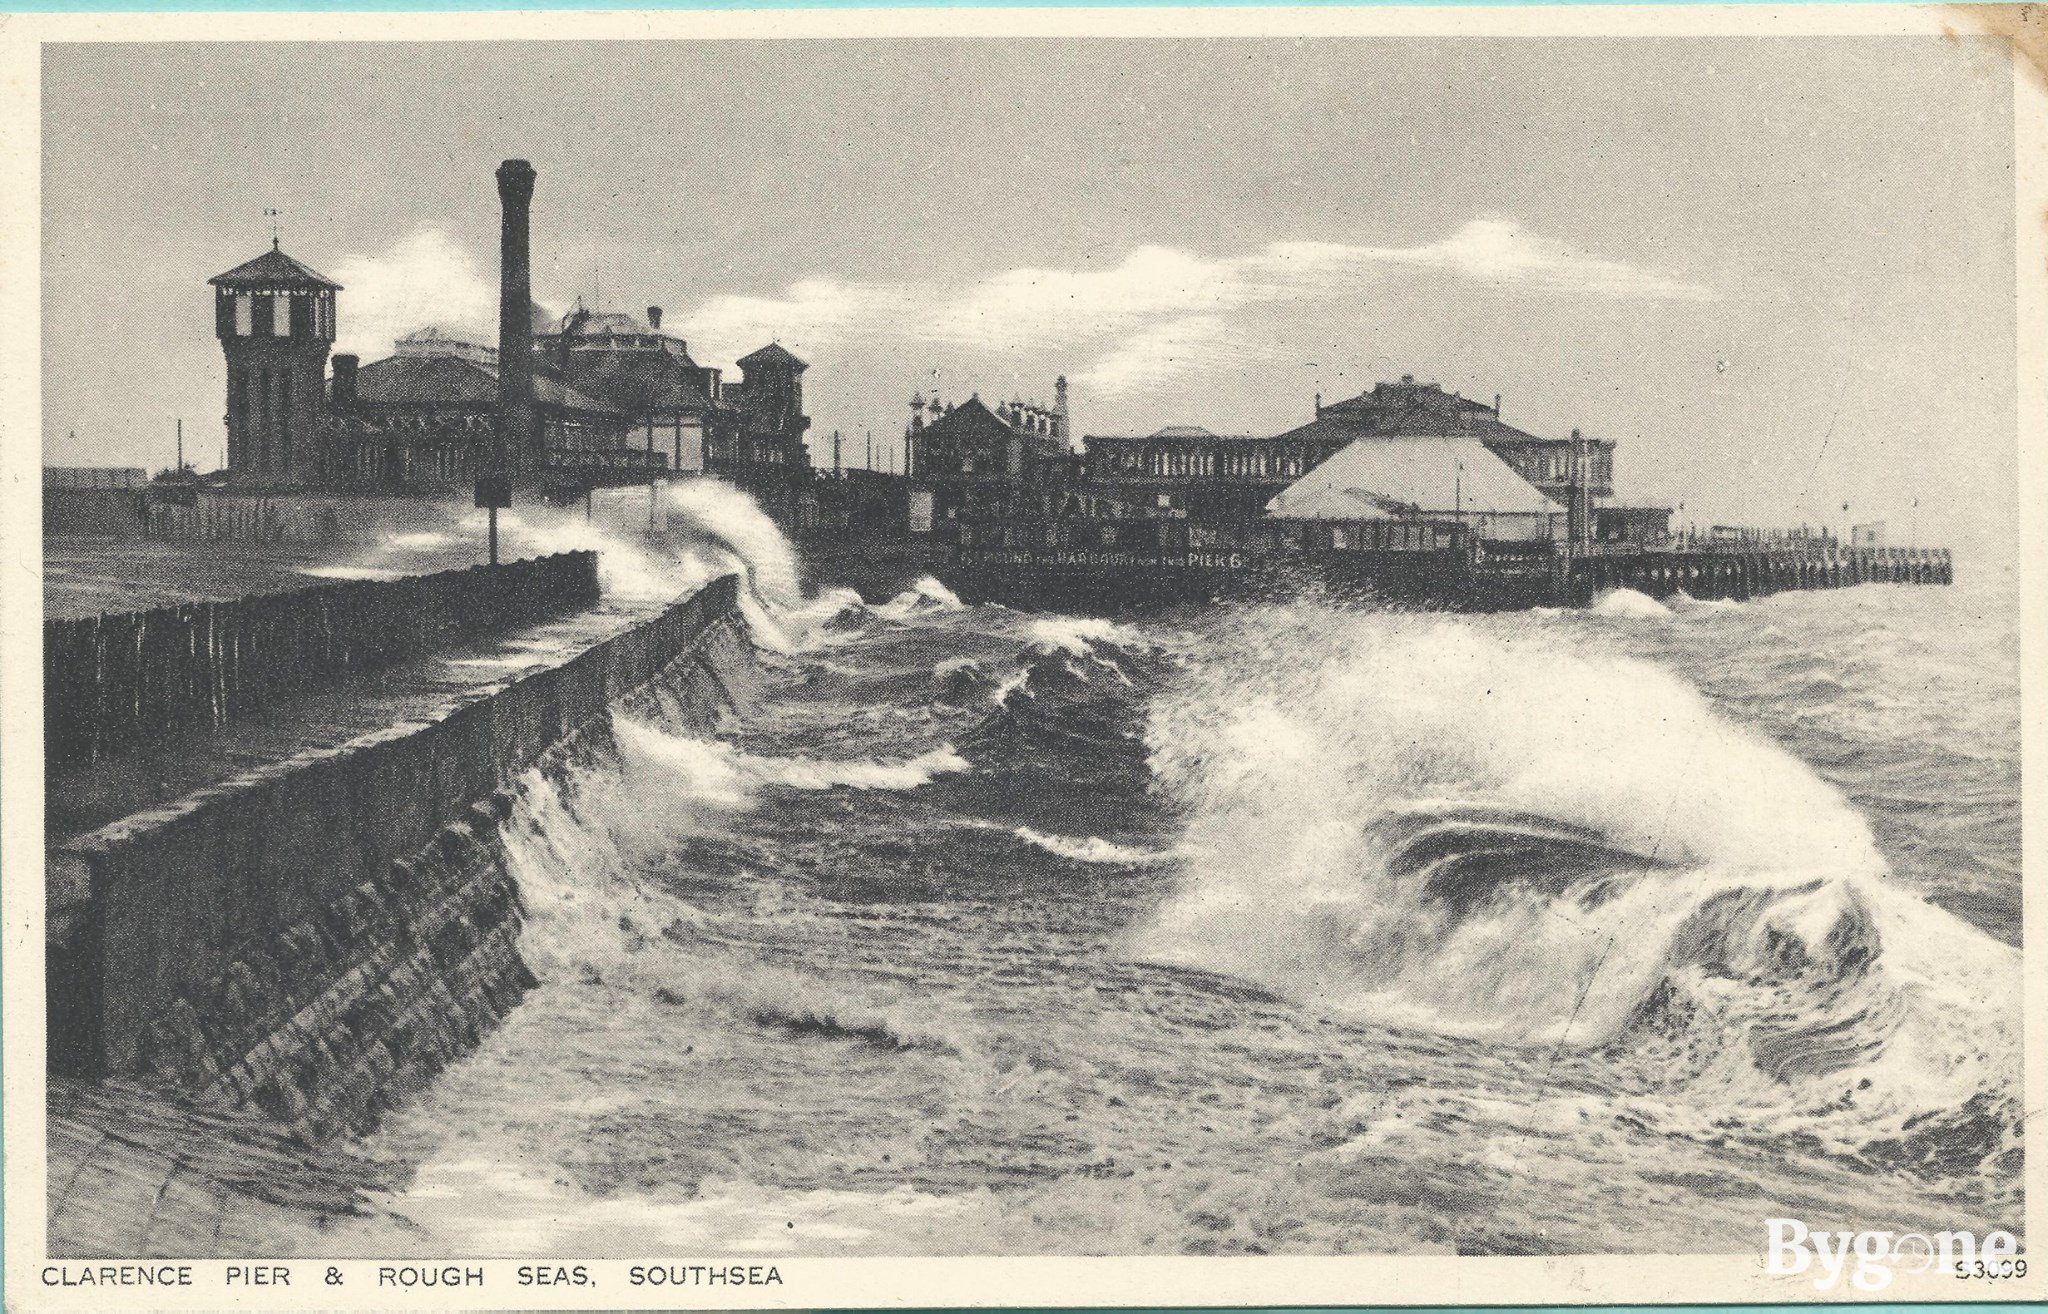 Clarence Pier and Rough Seas